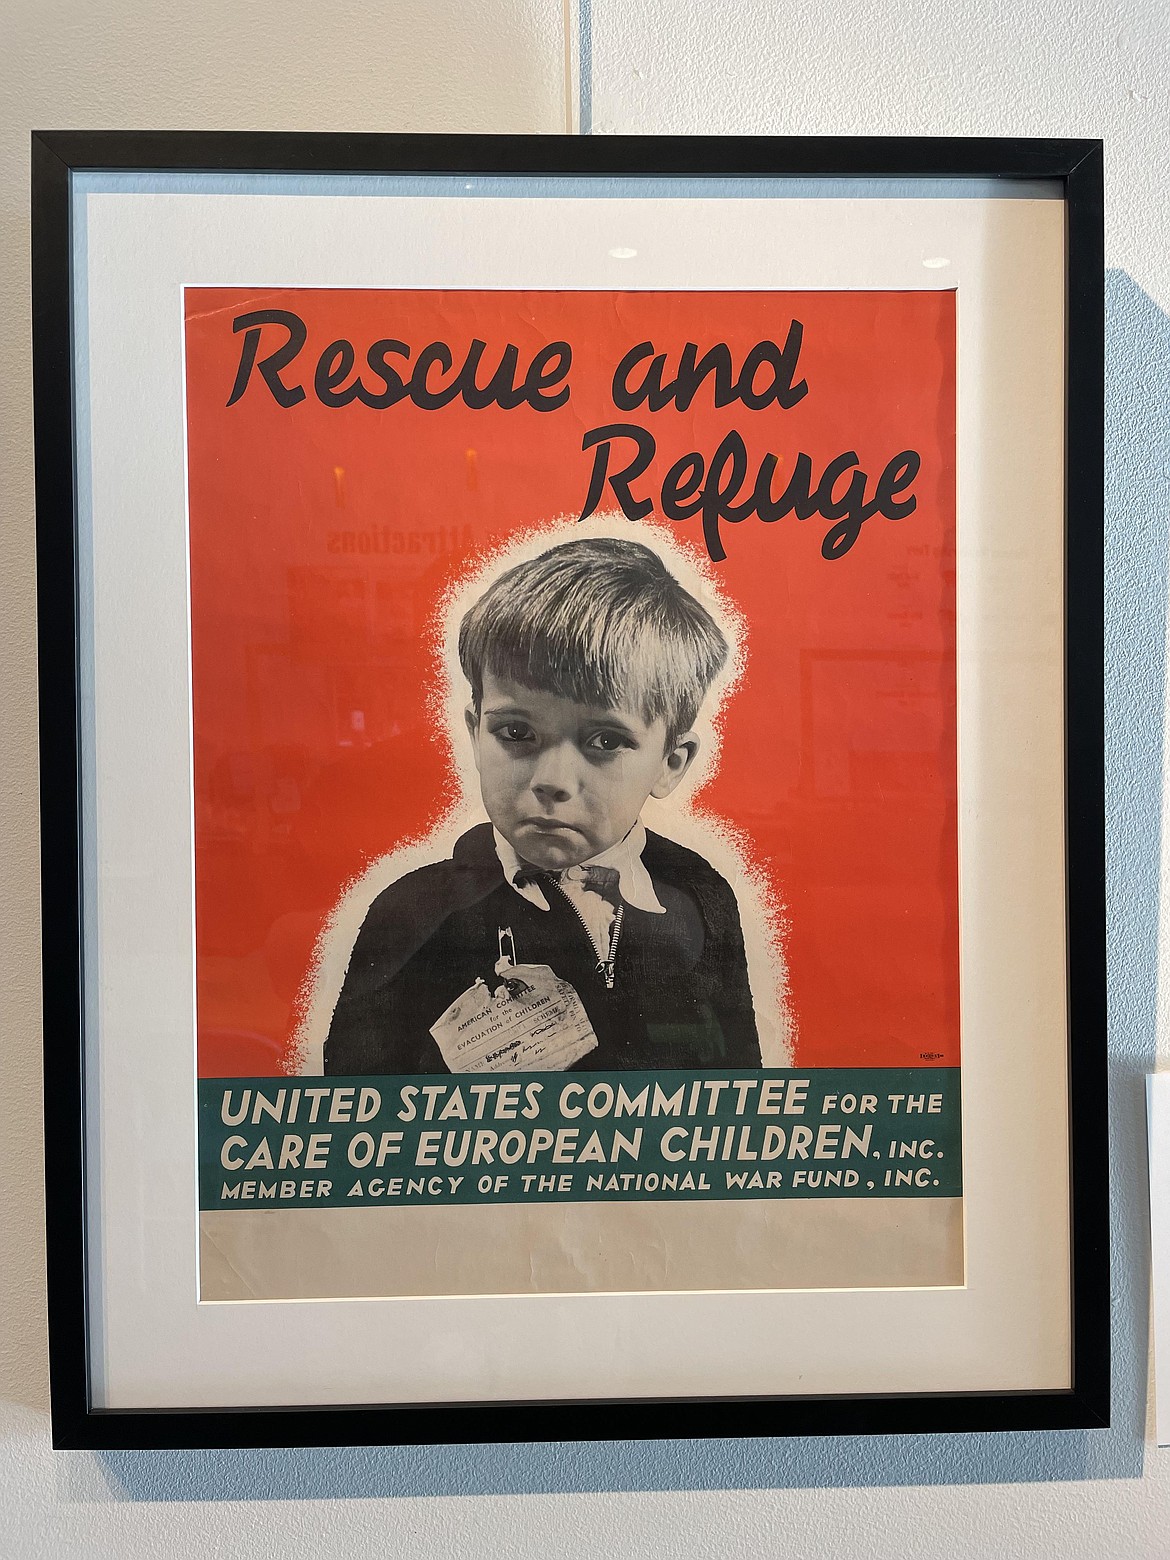 A poster soliciting general aid for refugee and displaced children during WWII. During the war, more than 1 million English residents, mostly mothers of young children, children and expectant mothers, were evacuated from the areas hardest hit by Axis bombing. Other nations suffered similar situations.